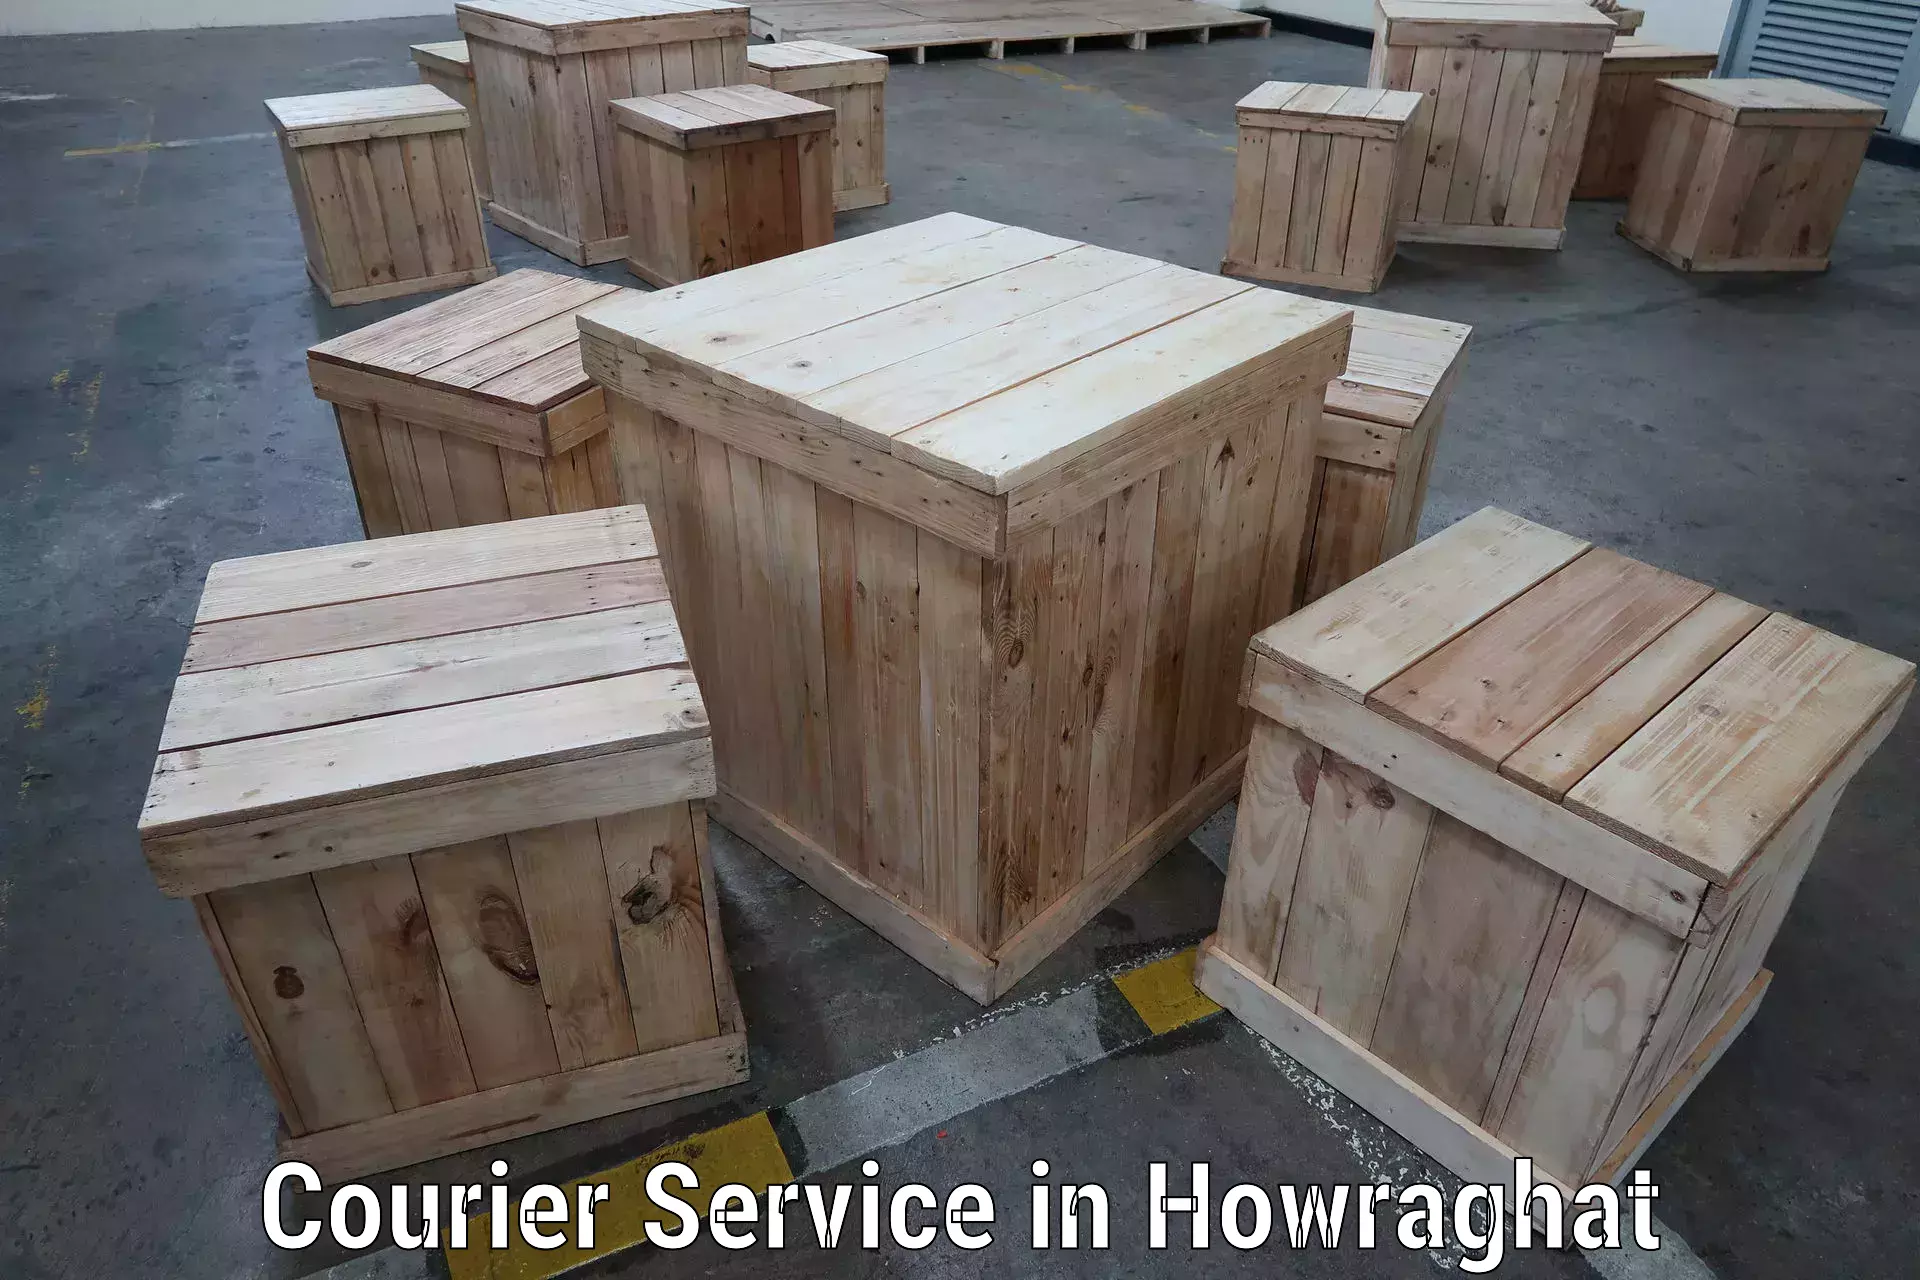 Courier dispatch services in Howraghat